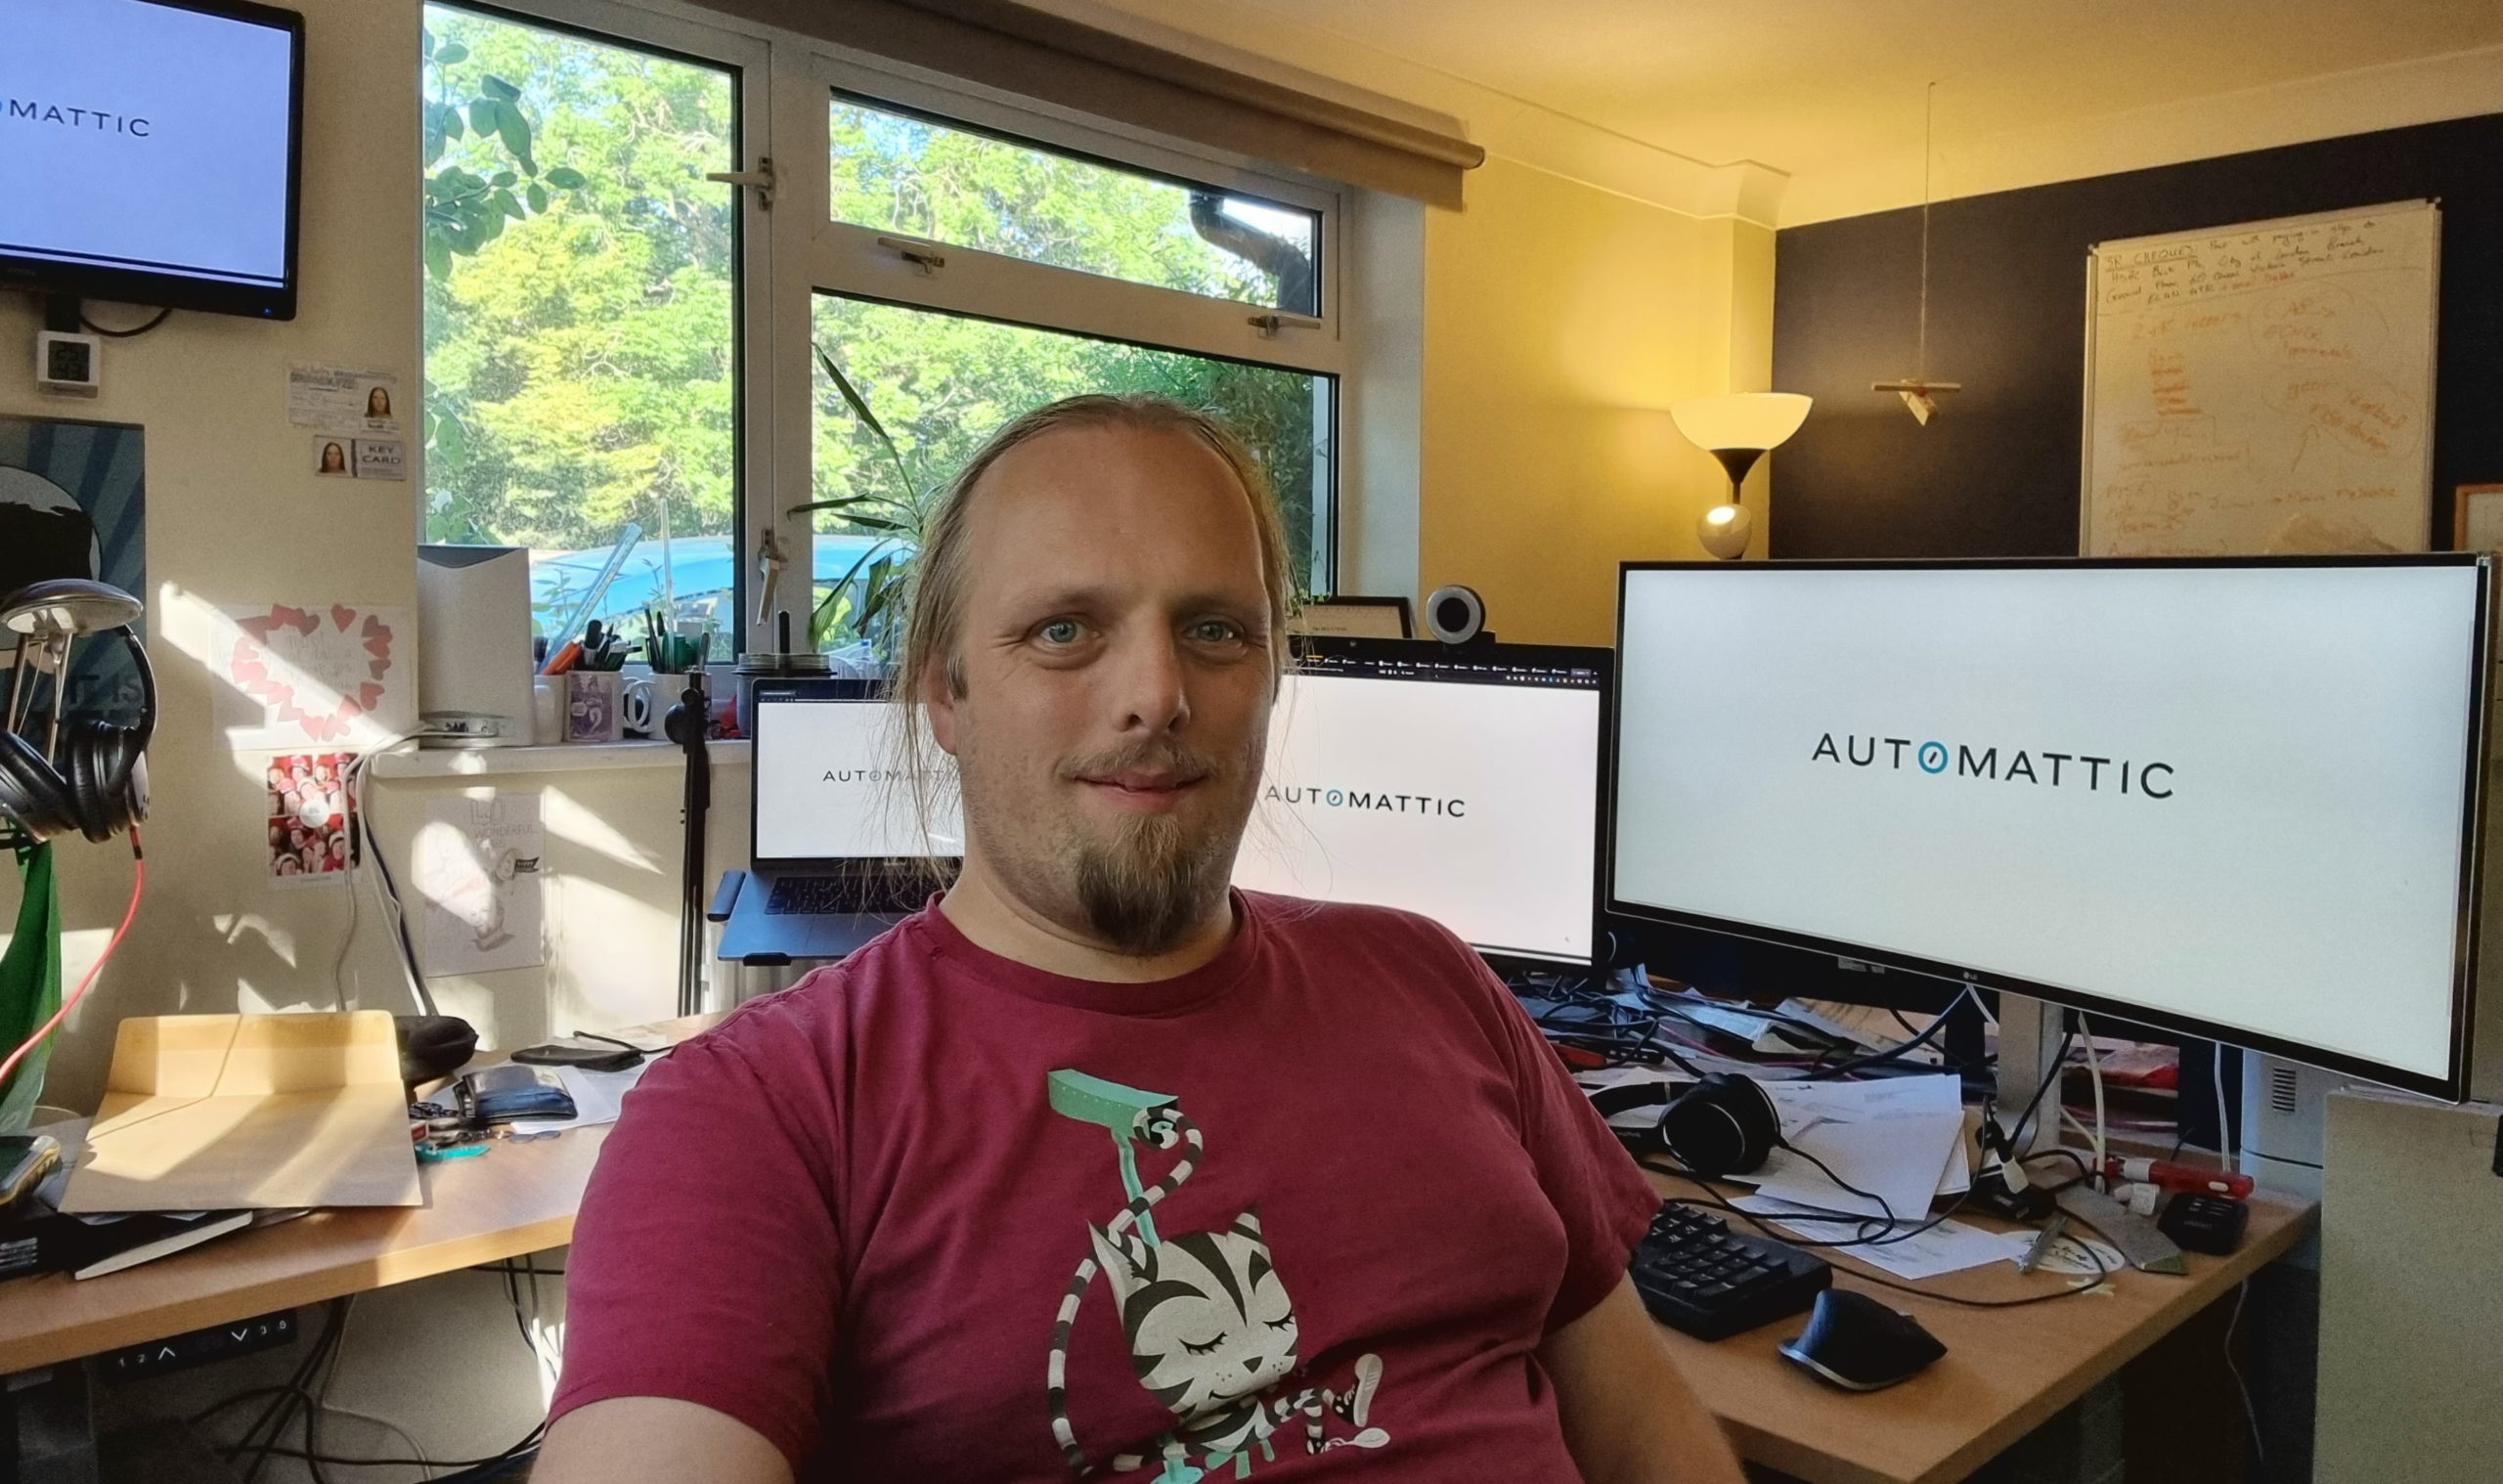 Dan sits in his office; behind him, four separate monitors show the Automattic logo.